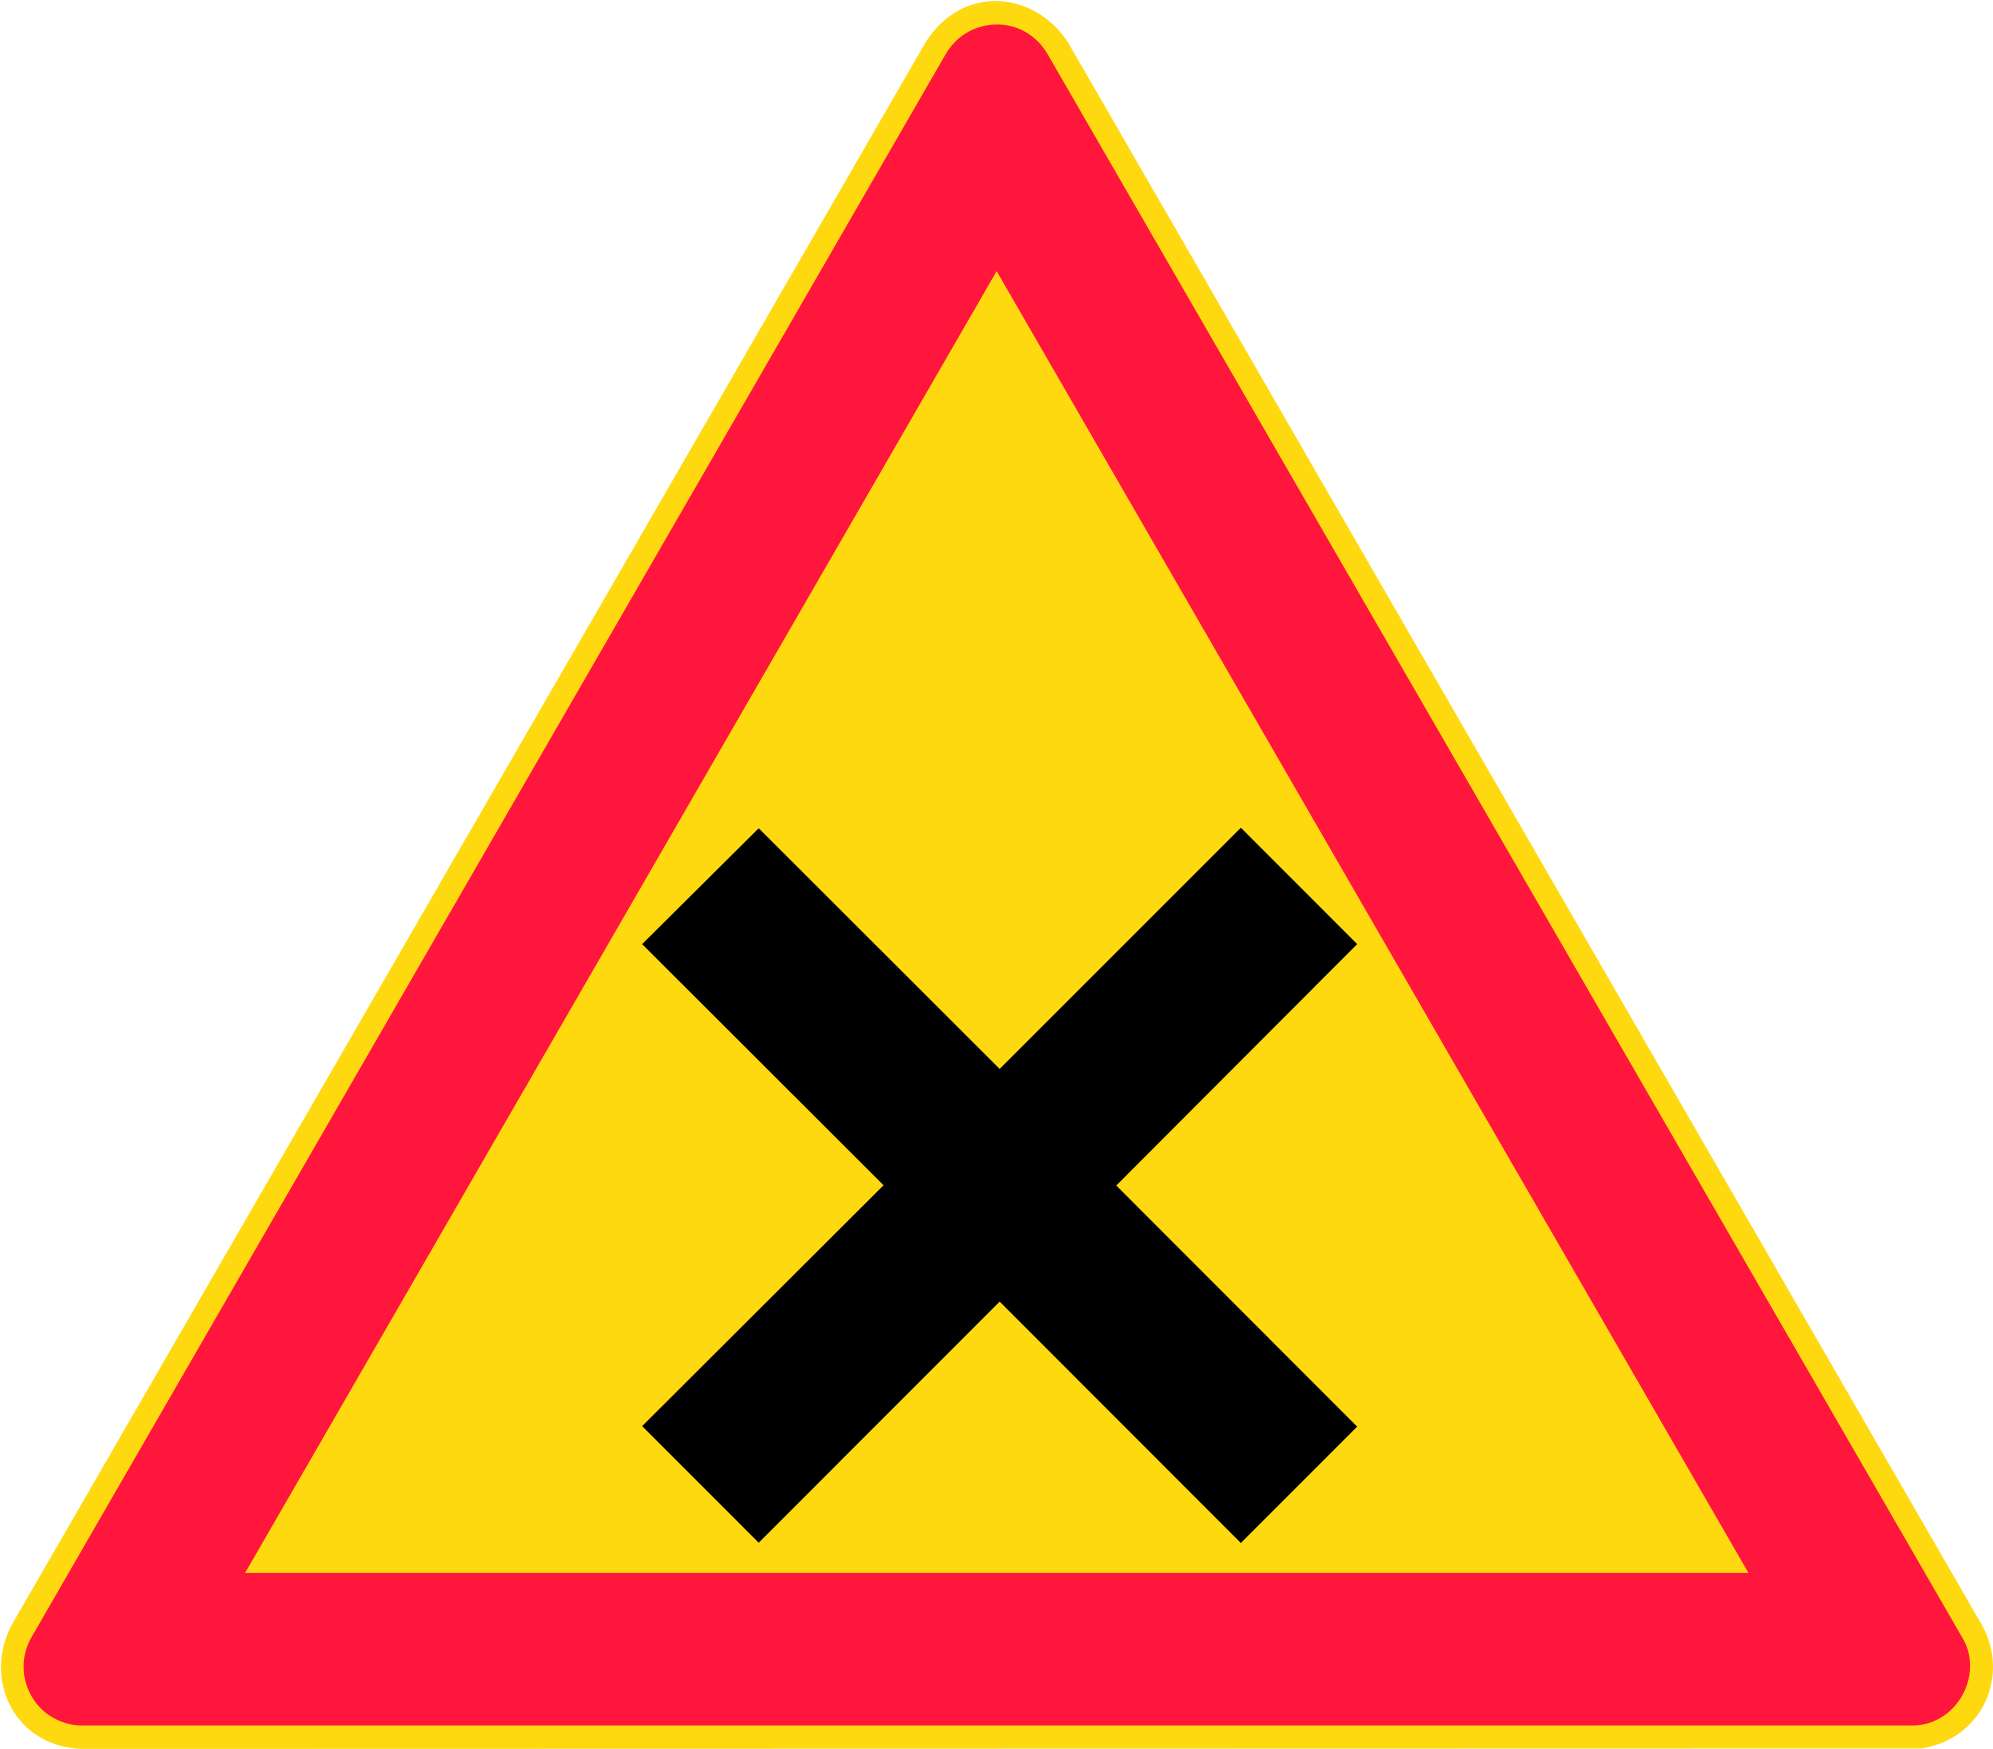 Finland Road Sign - Road Safety Signs Uk (2000x1778)